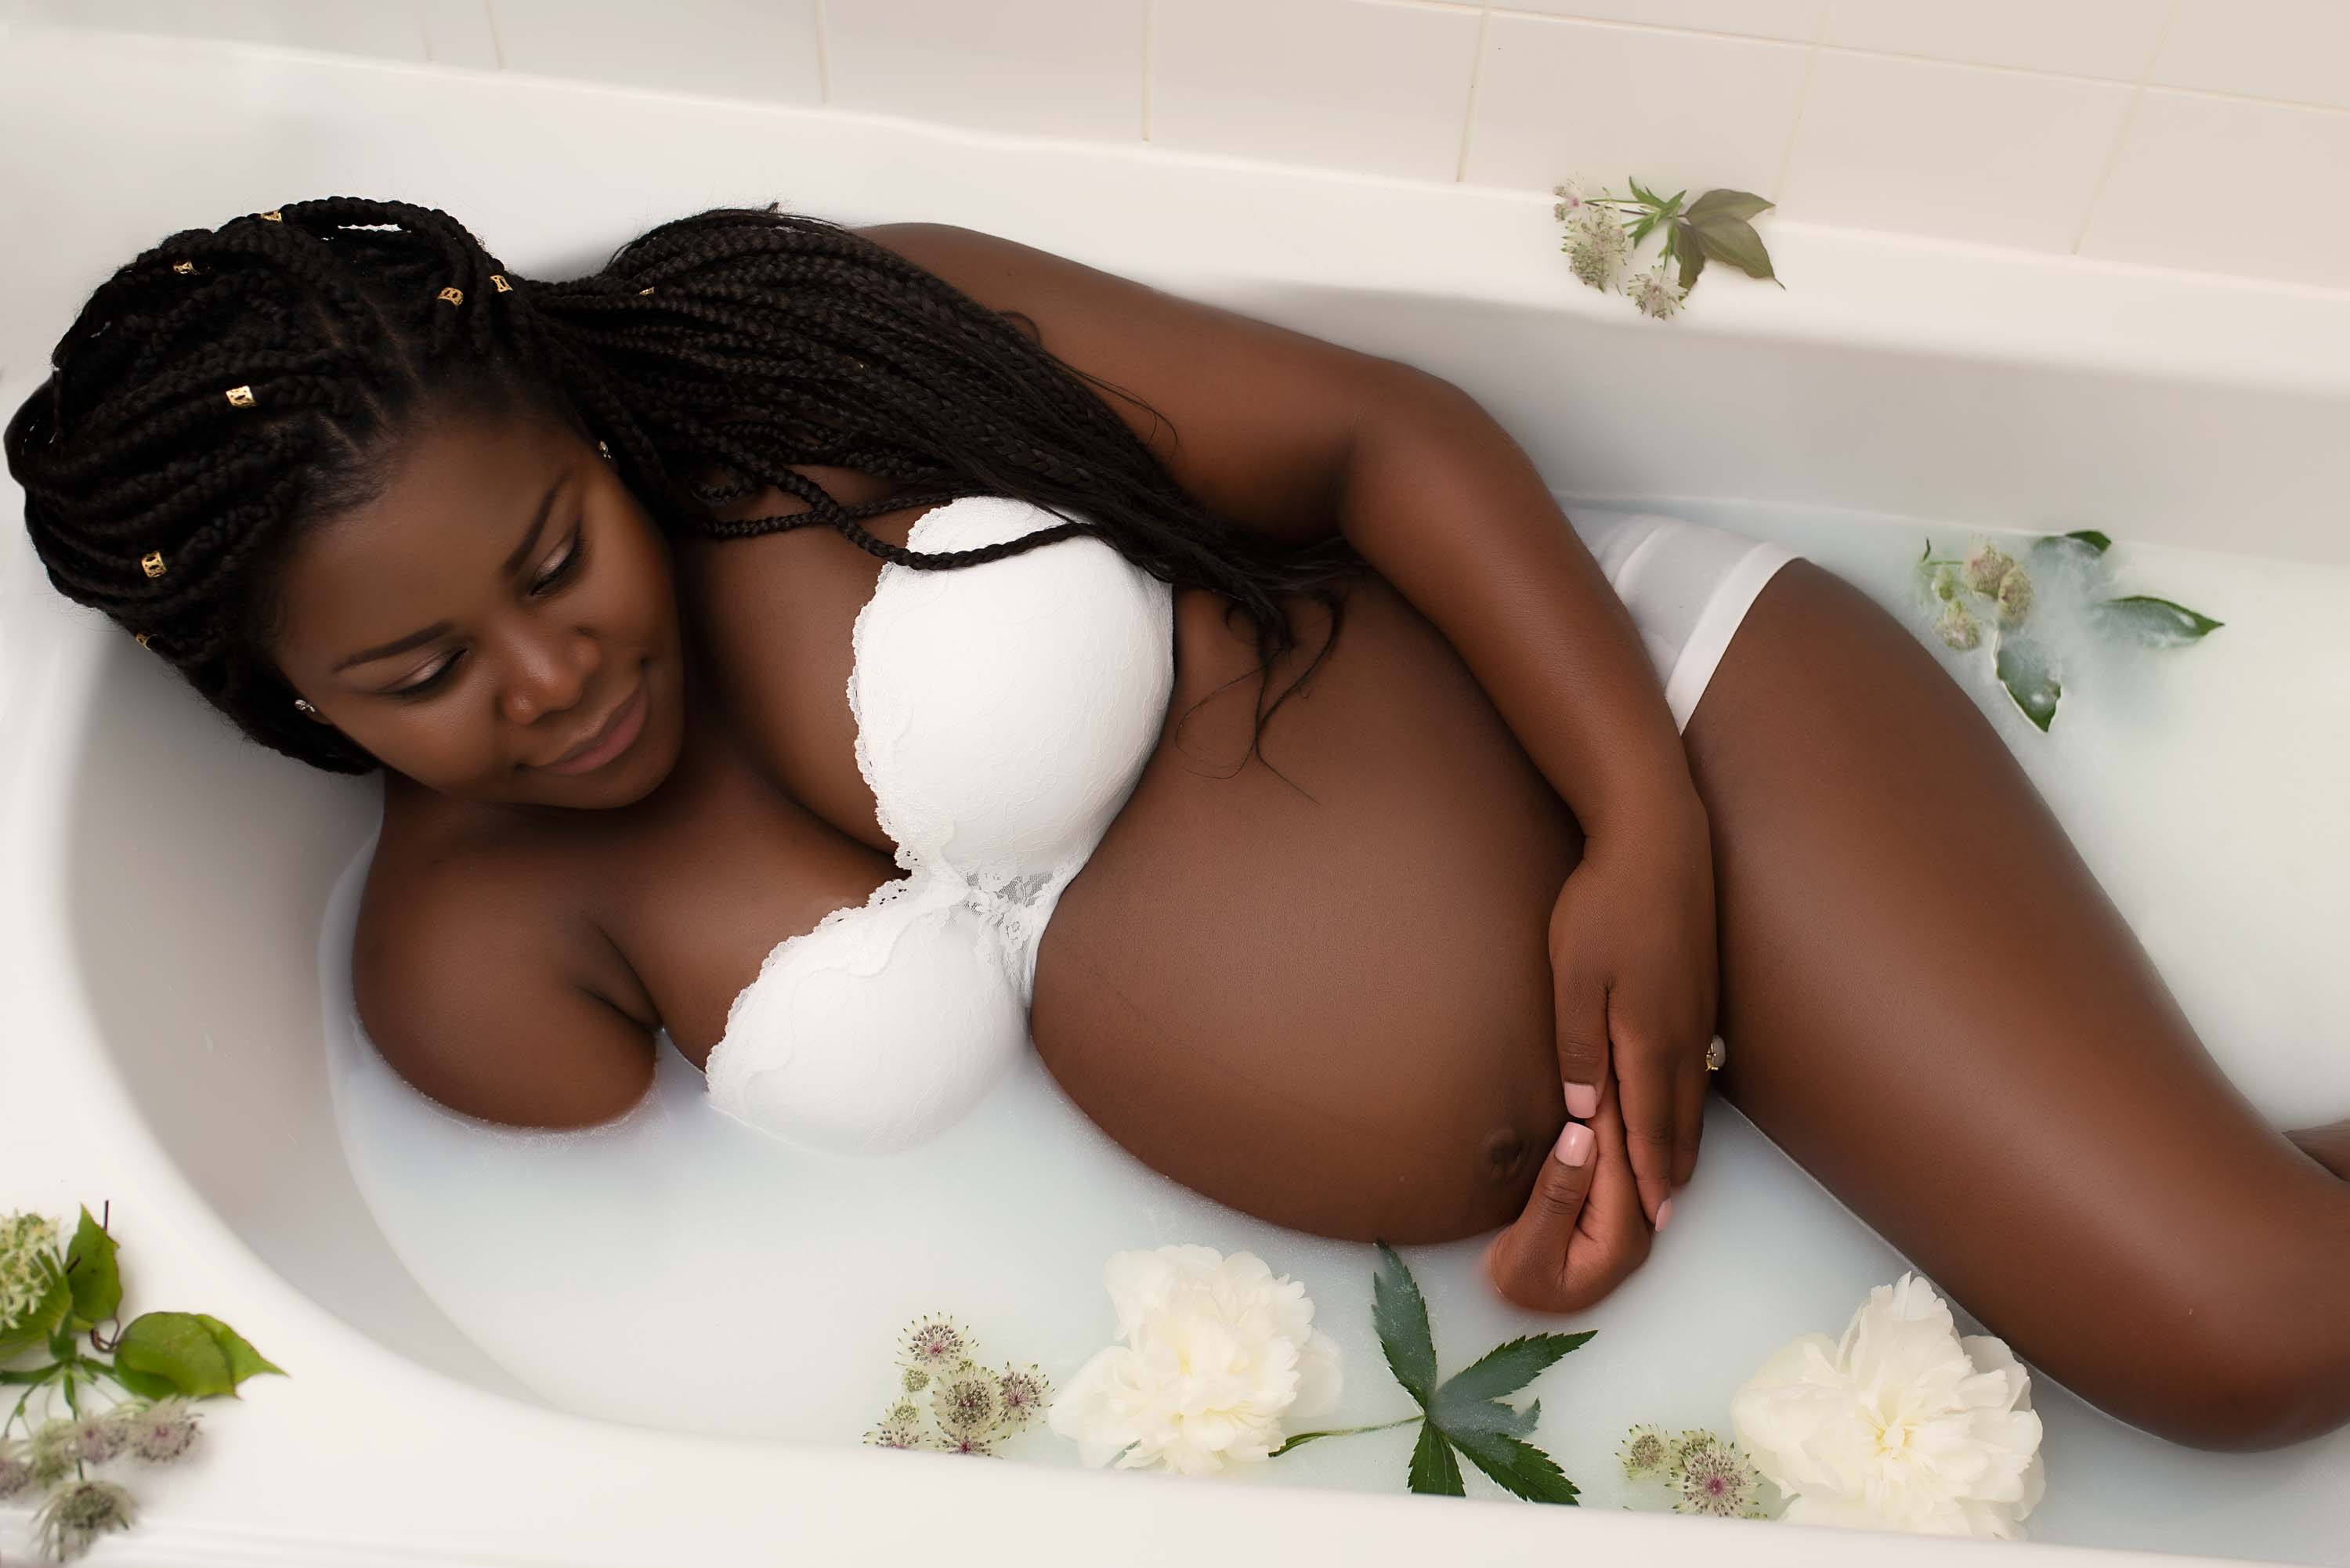 Women lying in milk bath with flowers for pregnancy photo shoot